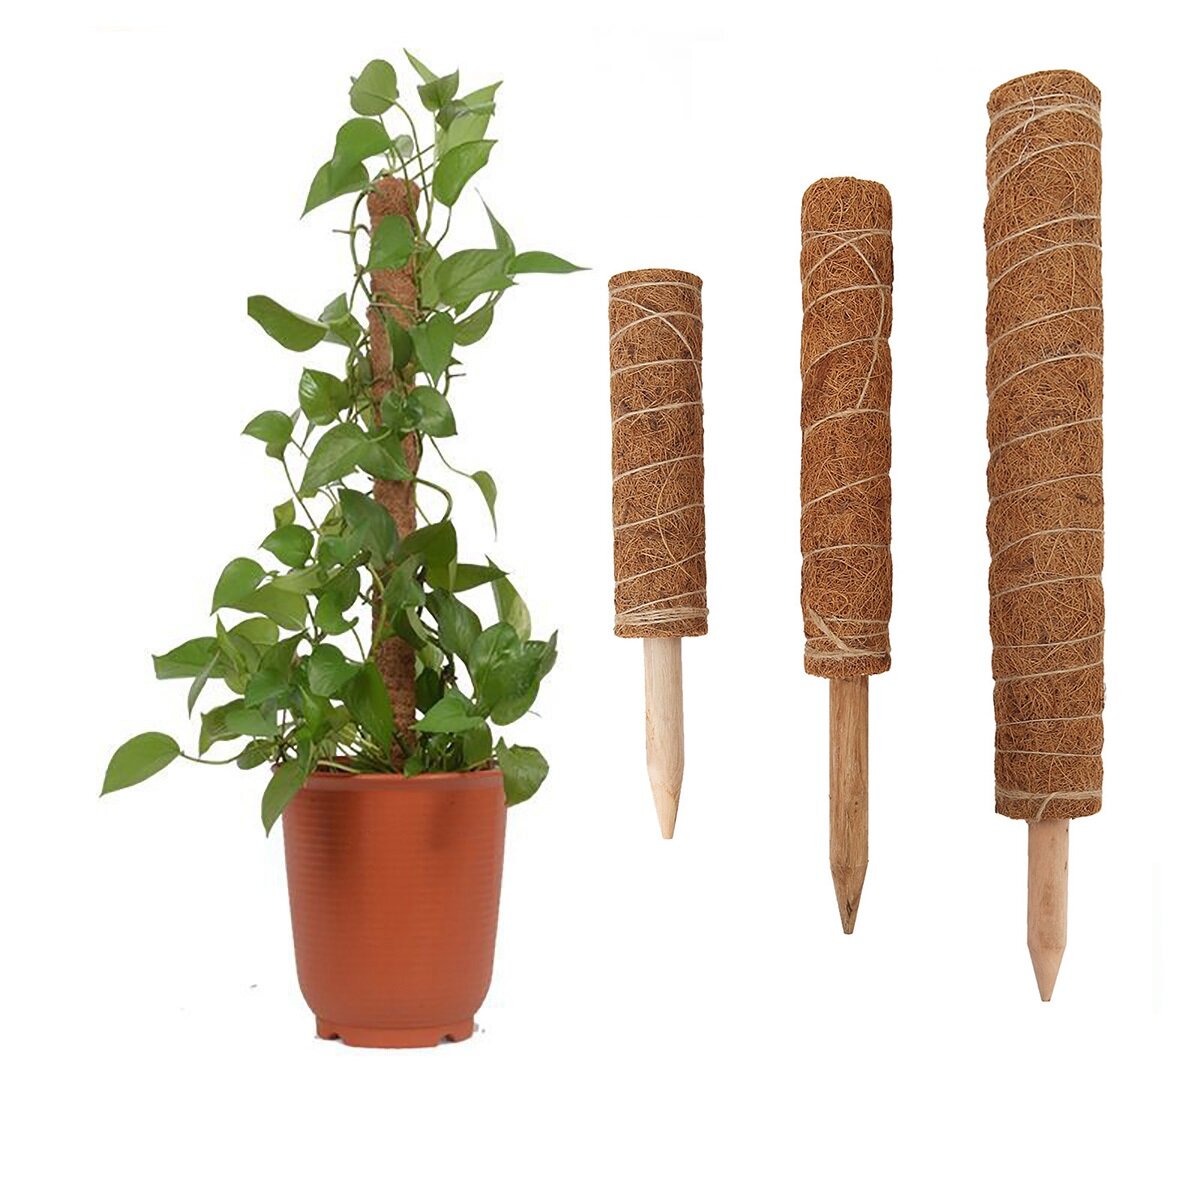 4 Pack Coir Totem Pole Plant Coir Moss Stick Totem Pole for Climmbing Plant Support Extension Climbi